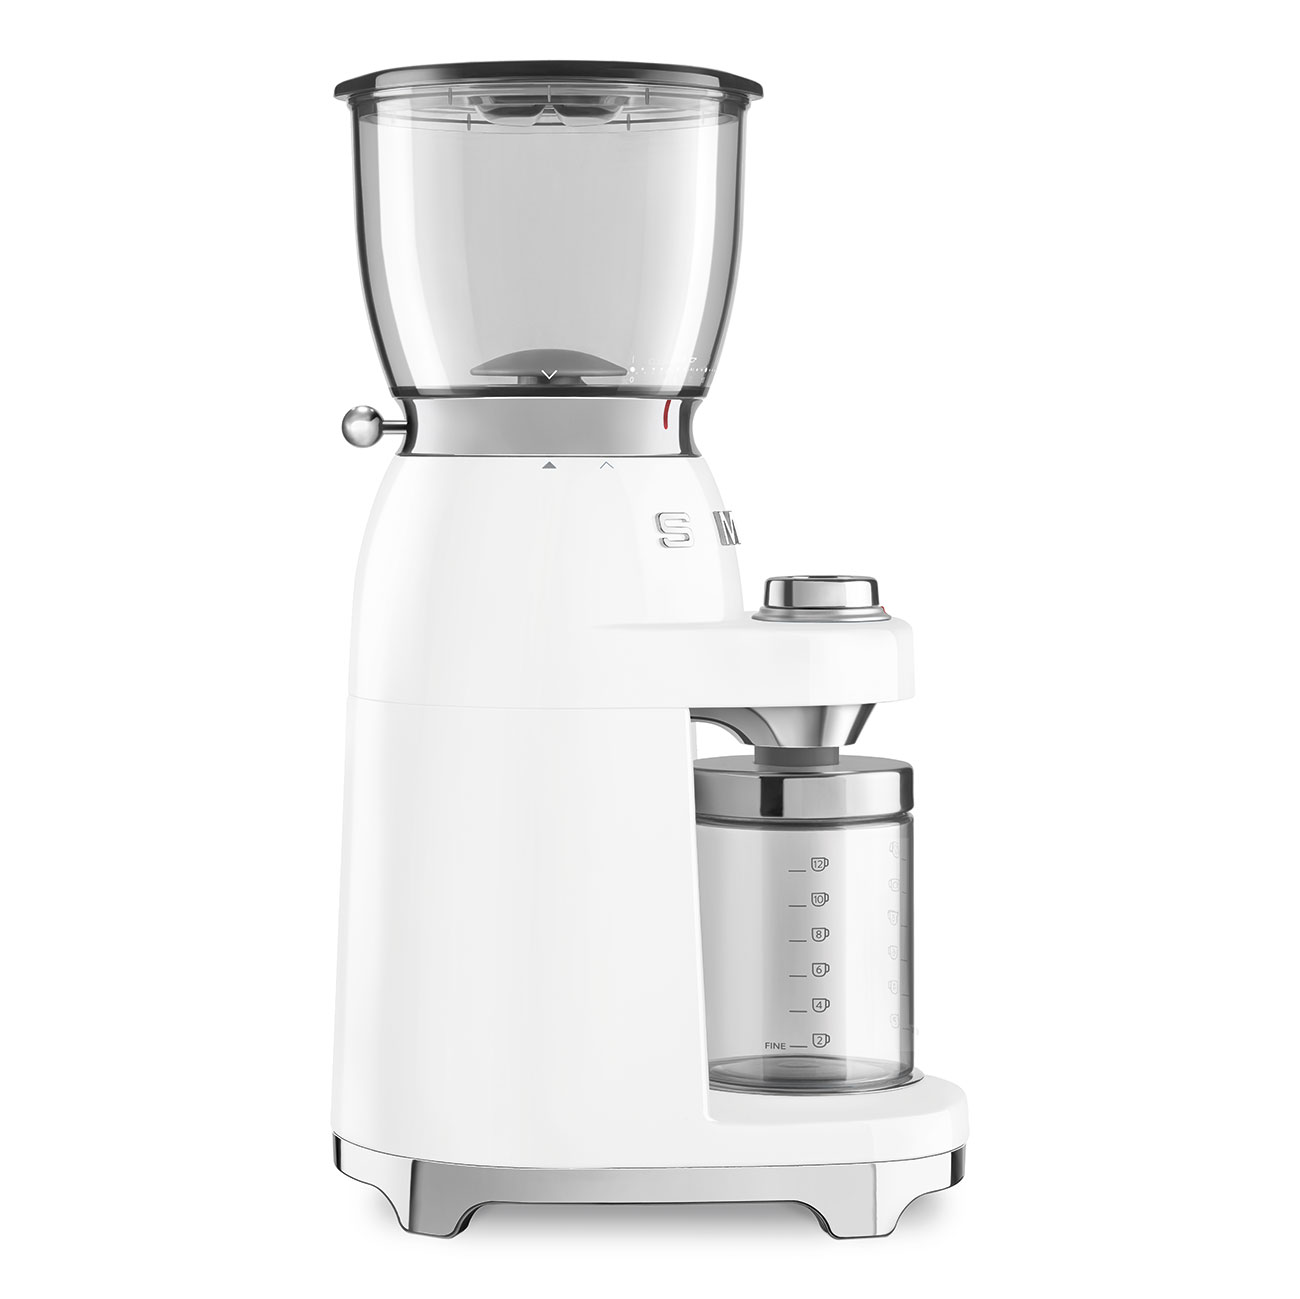 White Coffee Grinder featuring a conical burr - CGF11WHUK - Smeg_3